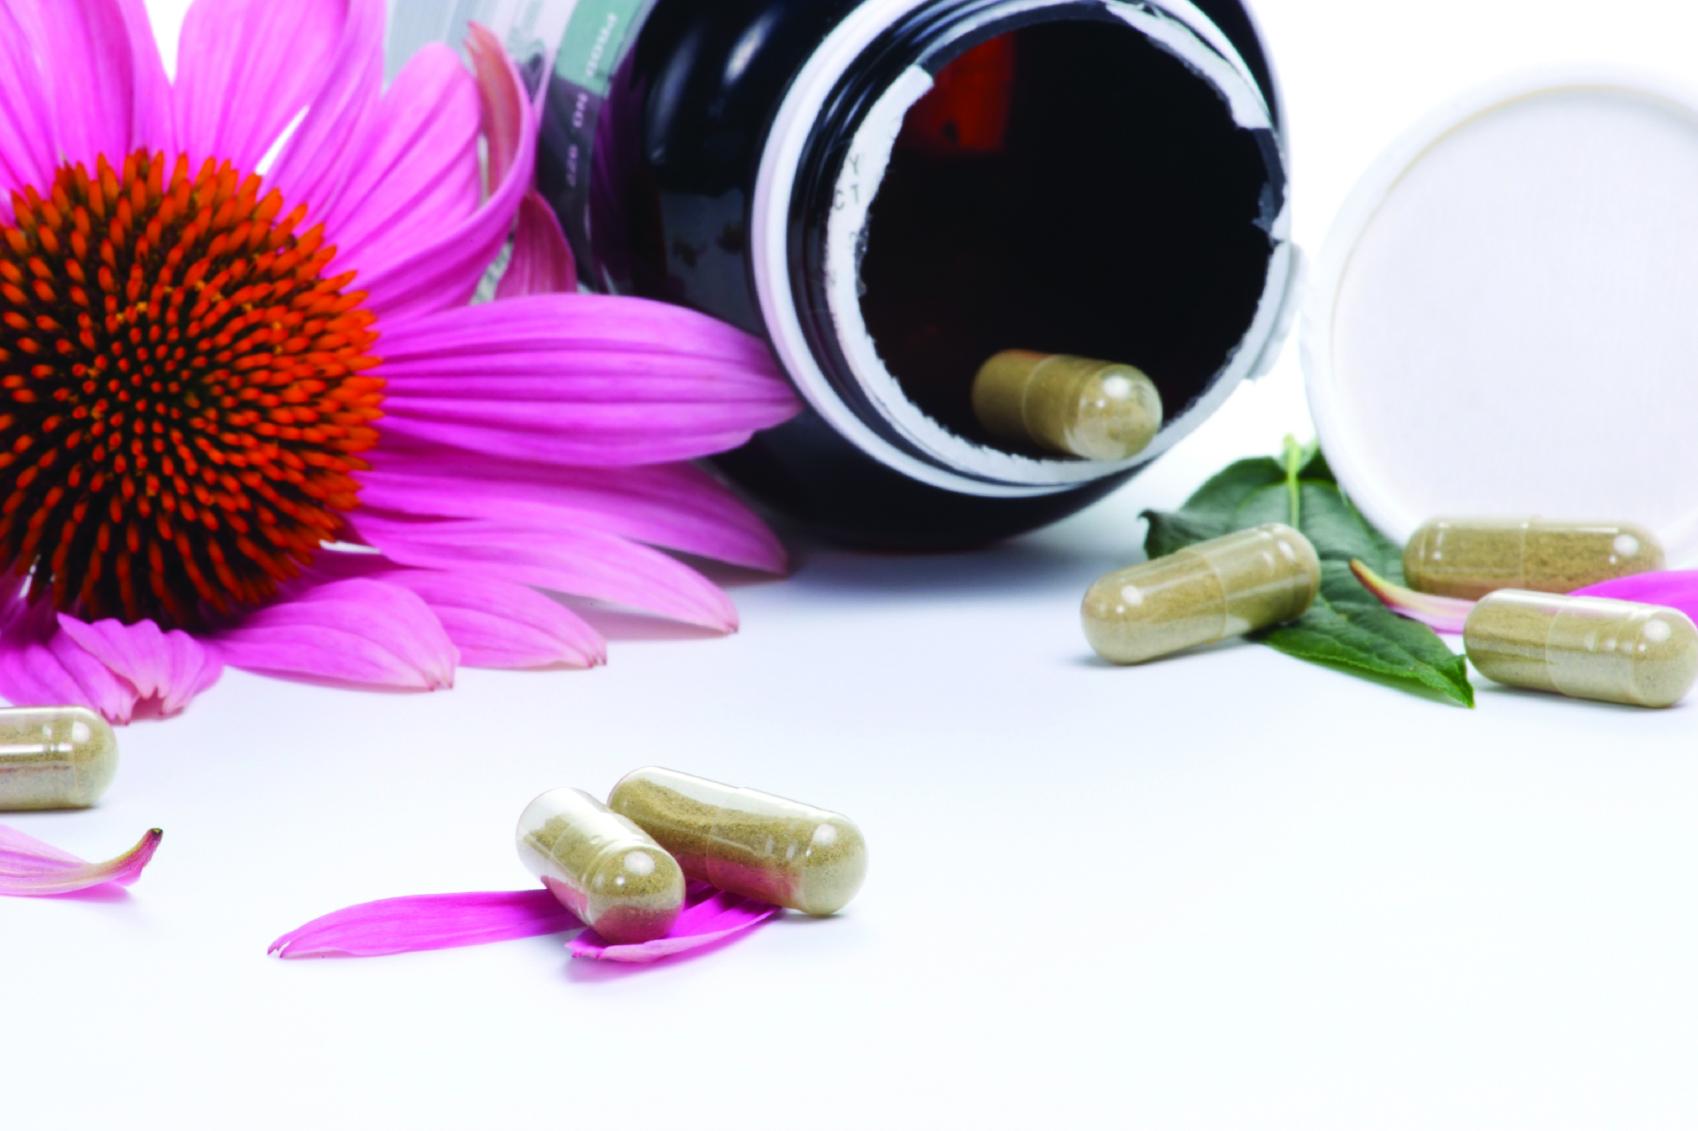 complementary medicines